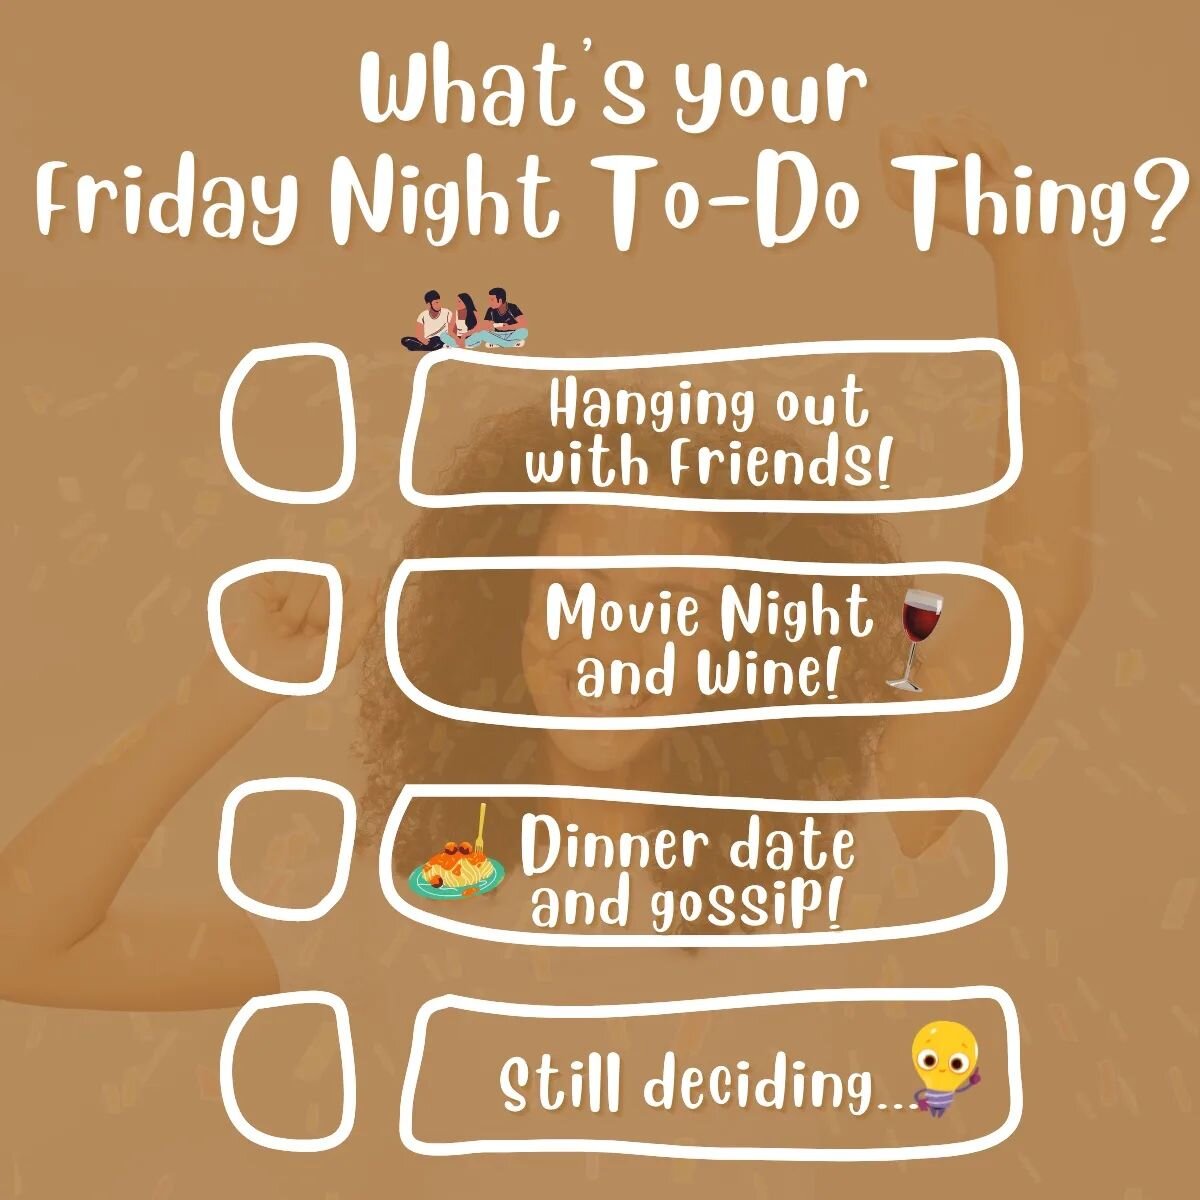 Happy Friday, Everyone! 😍❤️

What's your Friday Night plan for today??? ✨️
Share your plan in the comment section below! 😍👇

.
.
.
#tovieconsulting #tovieconsultingllc #tovieconsultinglife #consultingfirm #happyfriday💕 #fridayvibes✨ #fridaymood😍